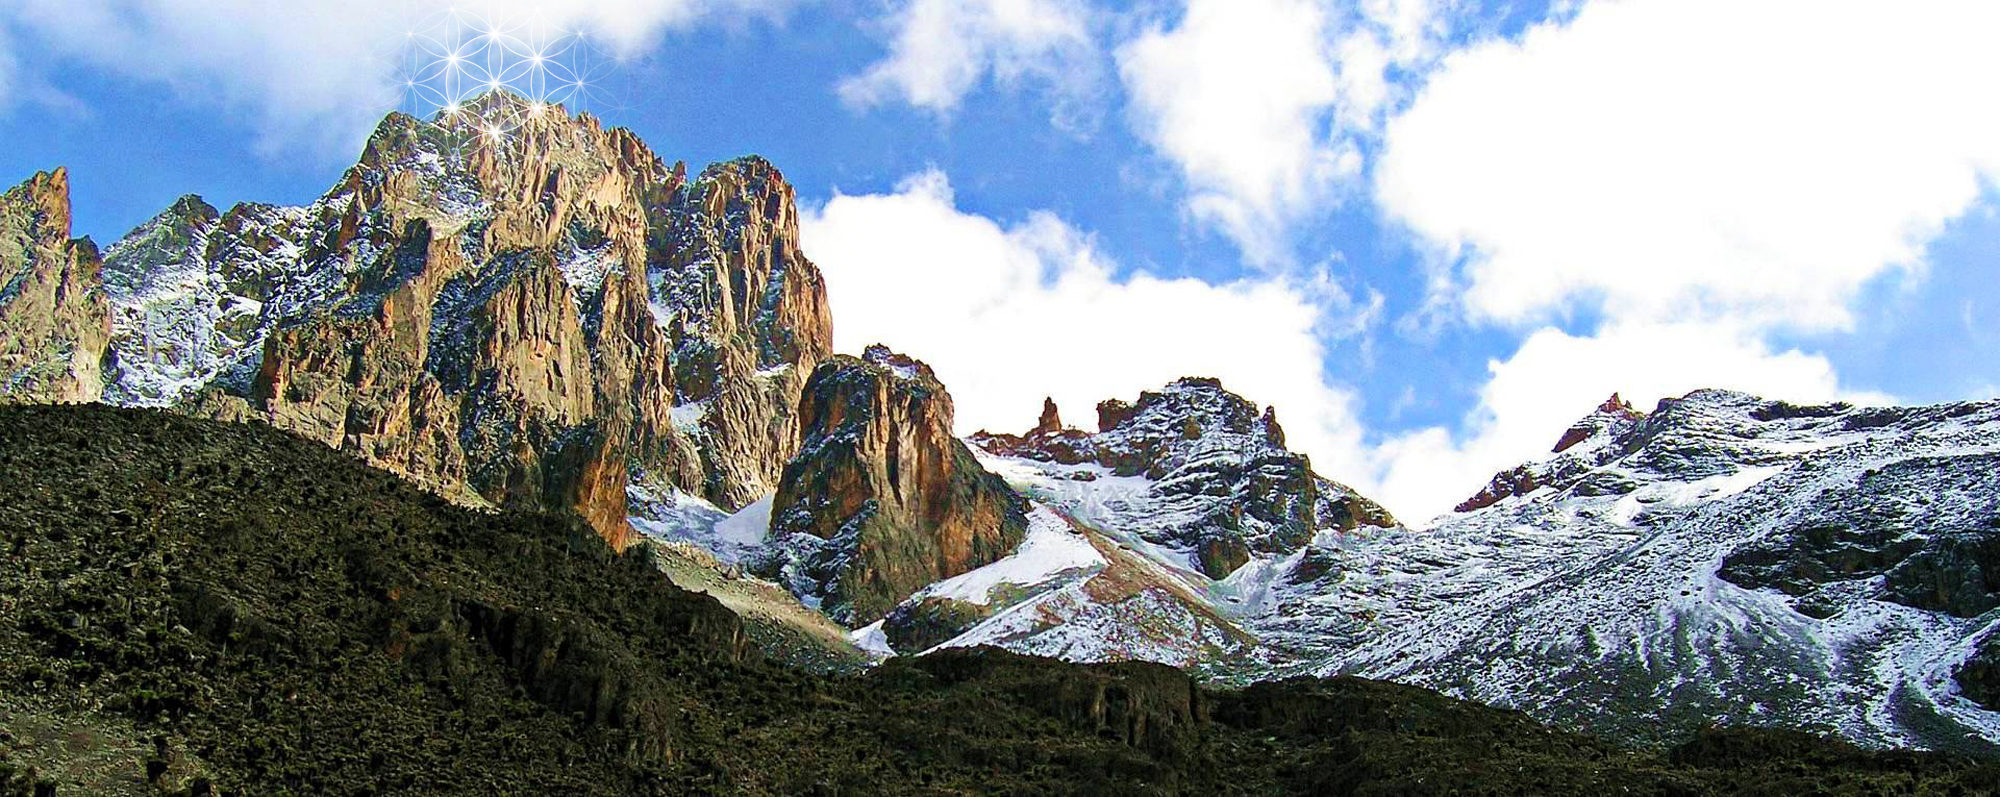 Mount Kenya and The Eden Template